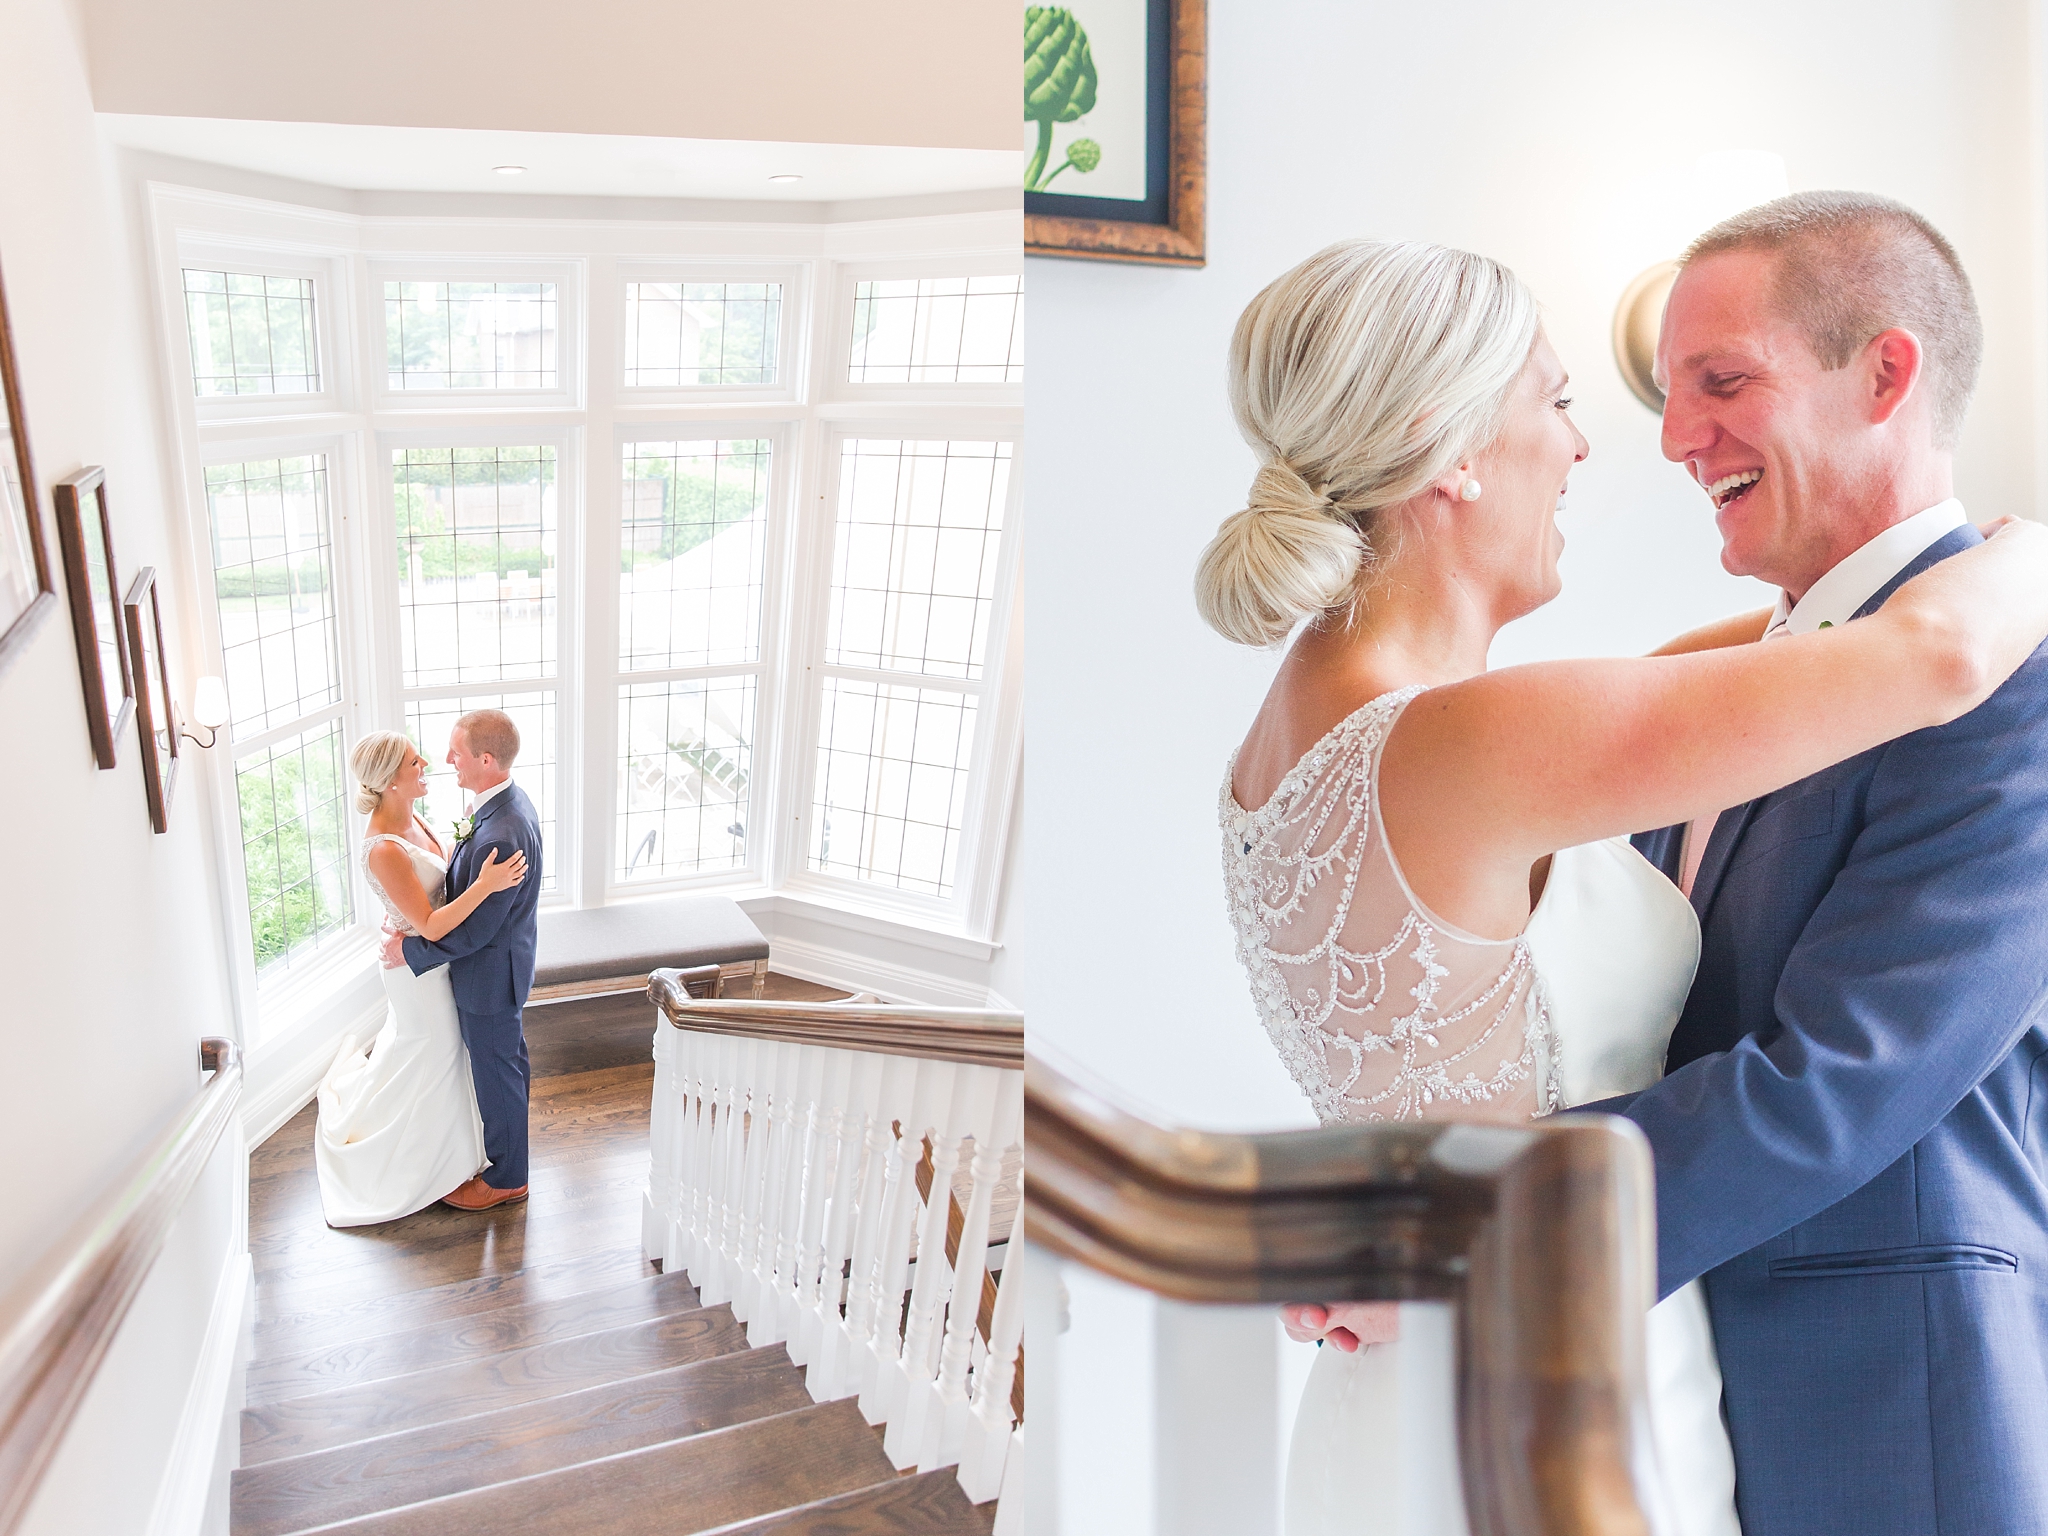 casually-chic-modern-wedding-photos-at-the-chapman-house-in-rochester-michigan-by-courtney-carolyn-photography_0014.jpg